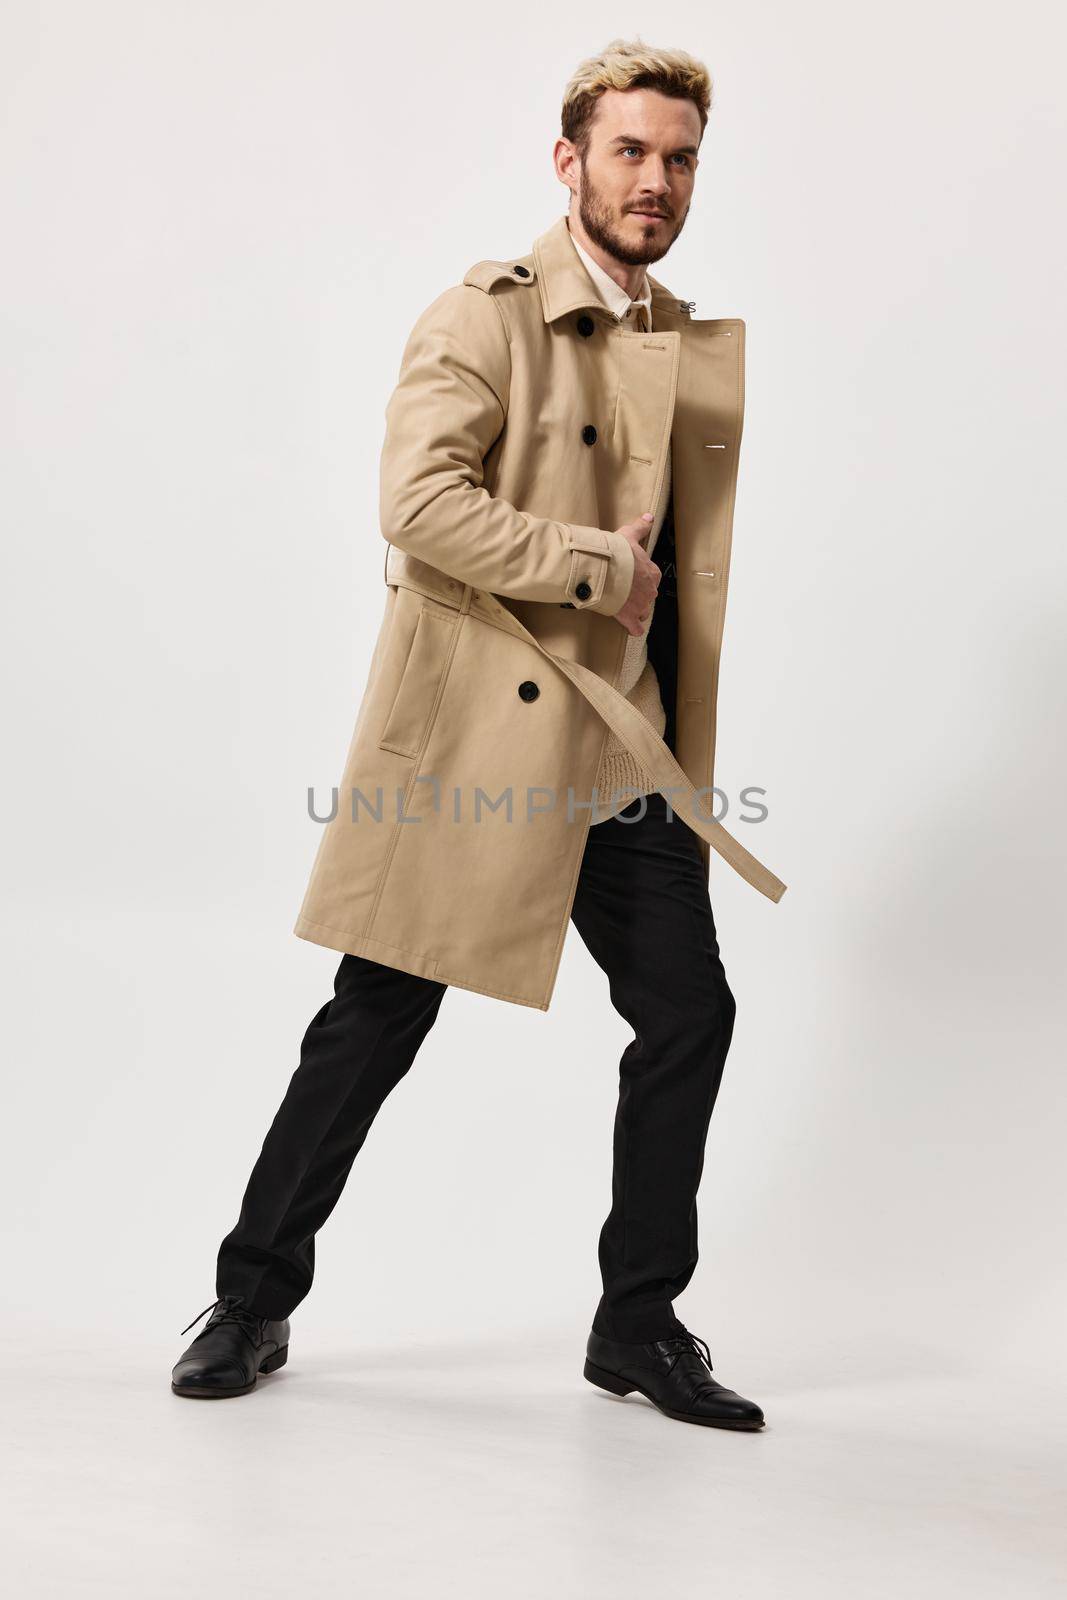 an energetic man in trousers and a beige coat leaned to the side against a light background in full growth. High quality photo